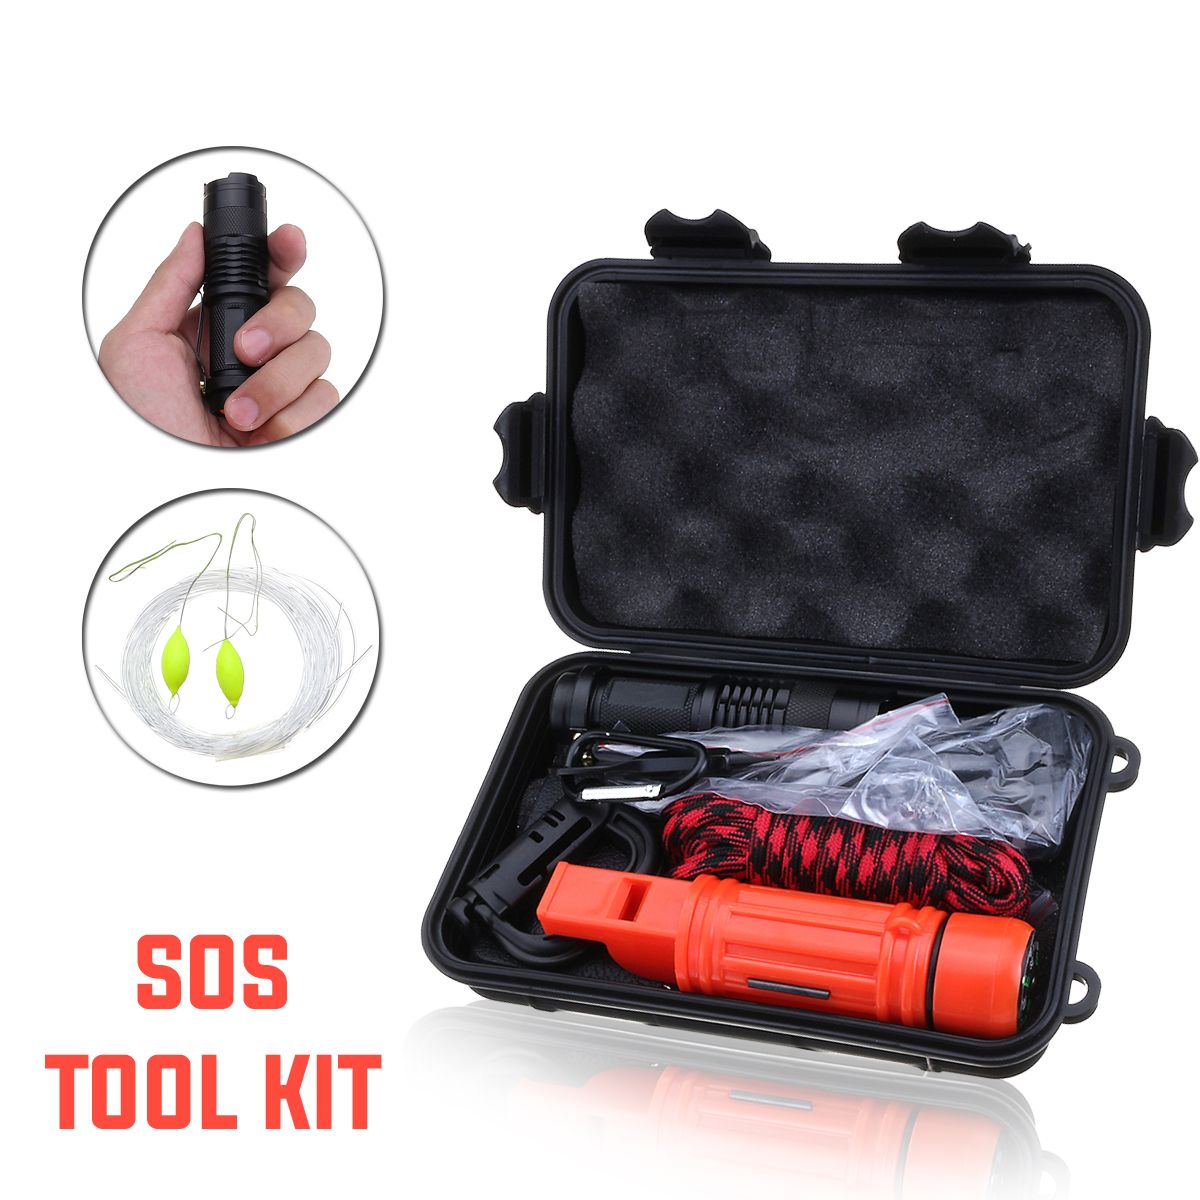 Emergency-Survival-Gear-Kit-SOS-Survival-Tools-Kit-With-Umbrella-Rope-Compass-Whistle-Carabiner-1309360